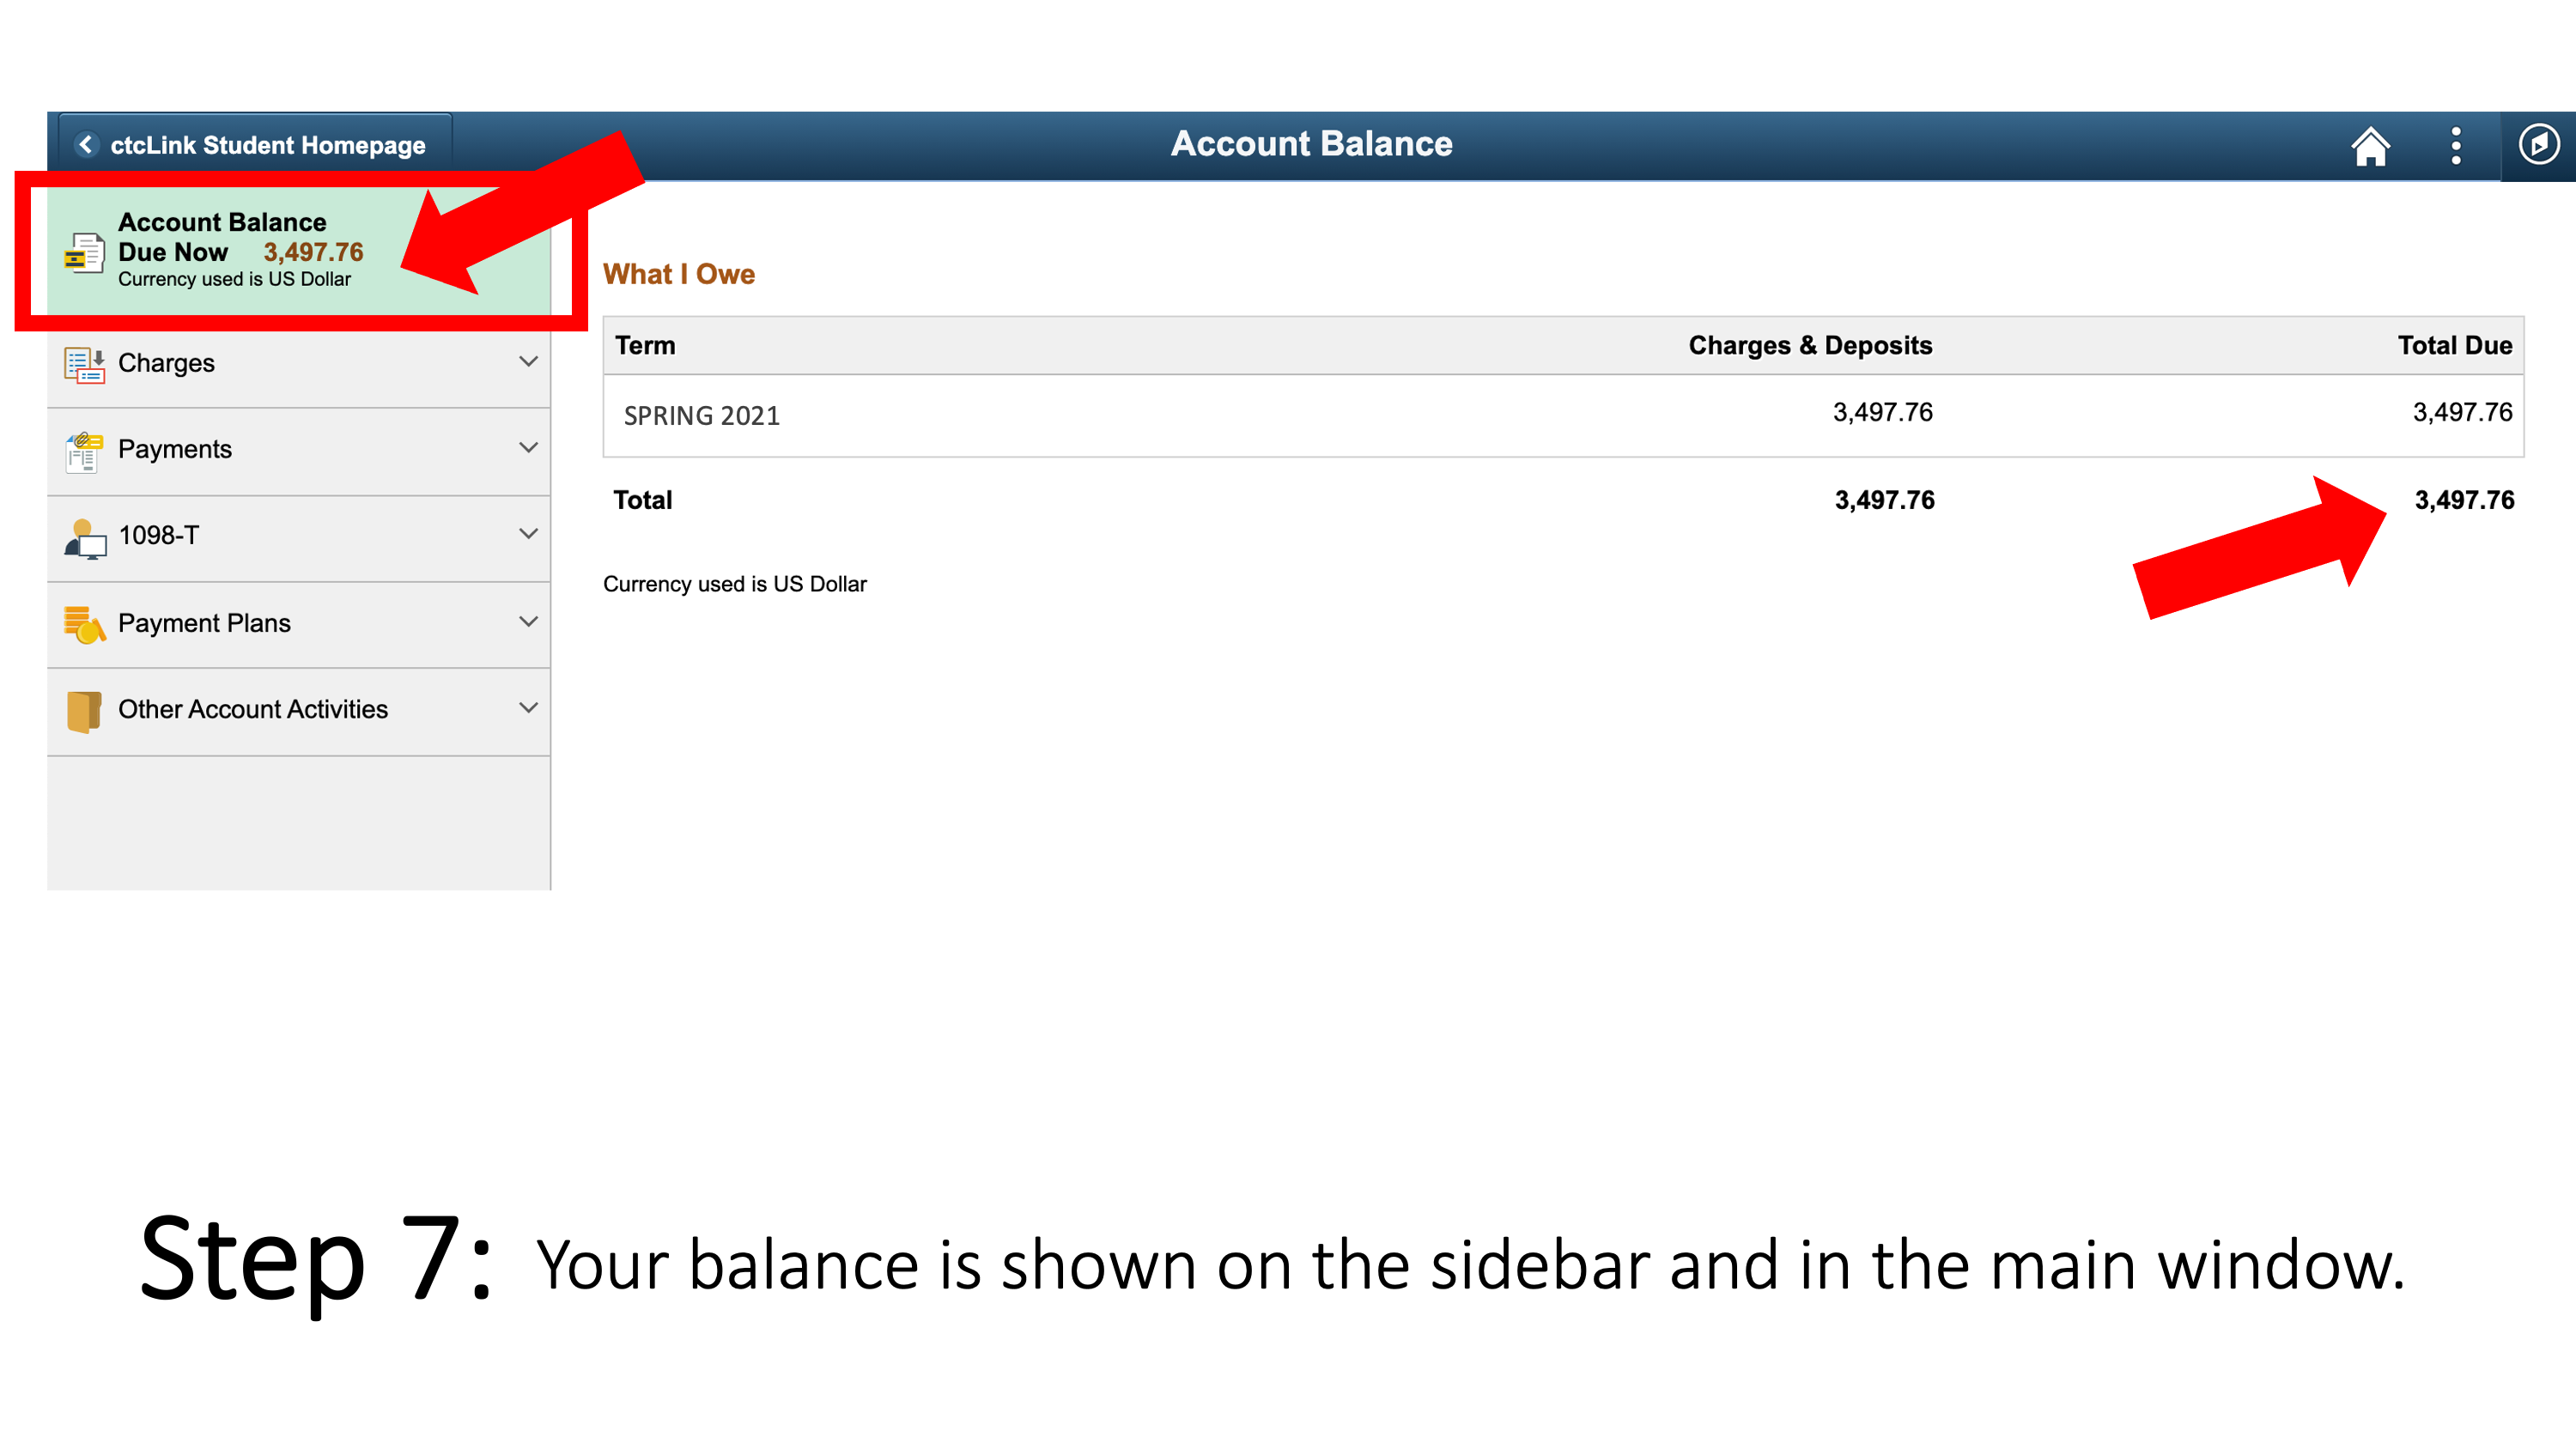 Your balance is shown on the sidebar and in the main window.